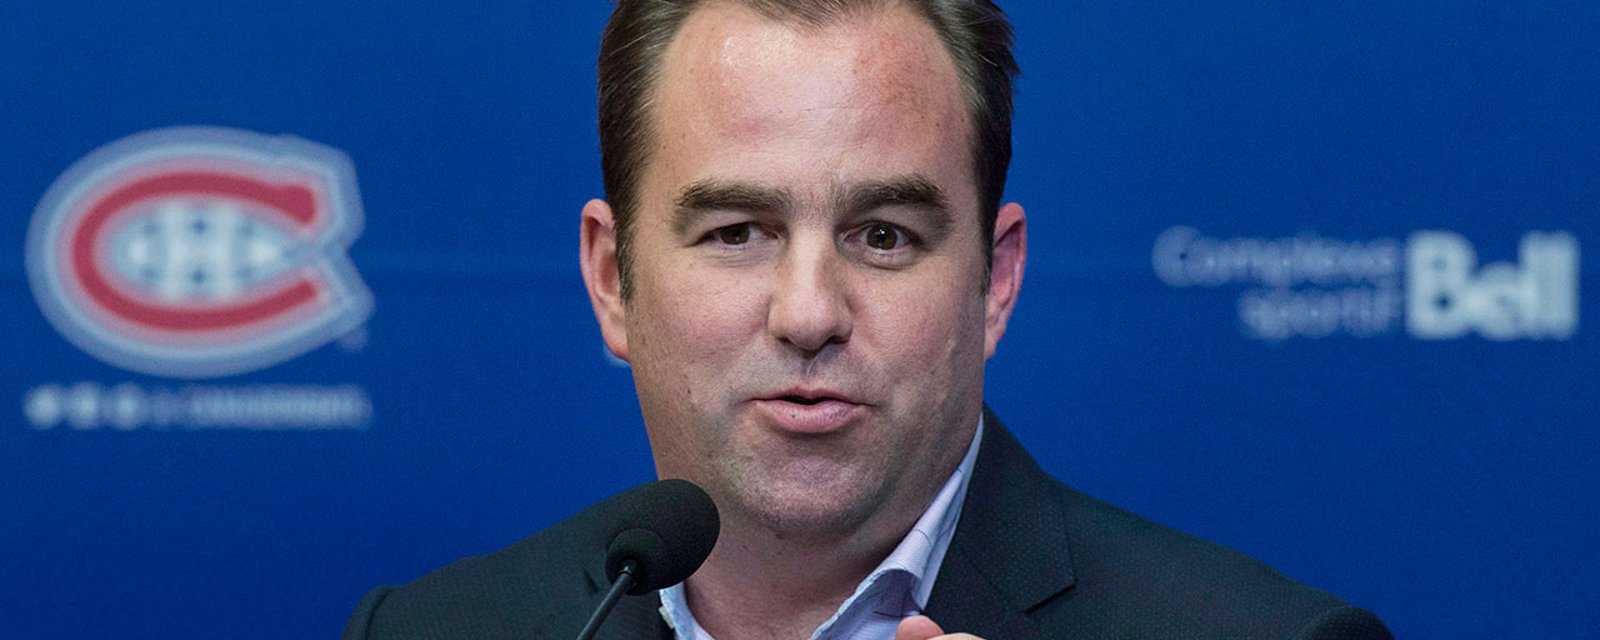 Habs owner Geoff Molson saves man from a plane crash.